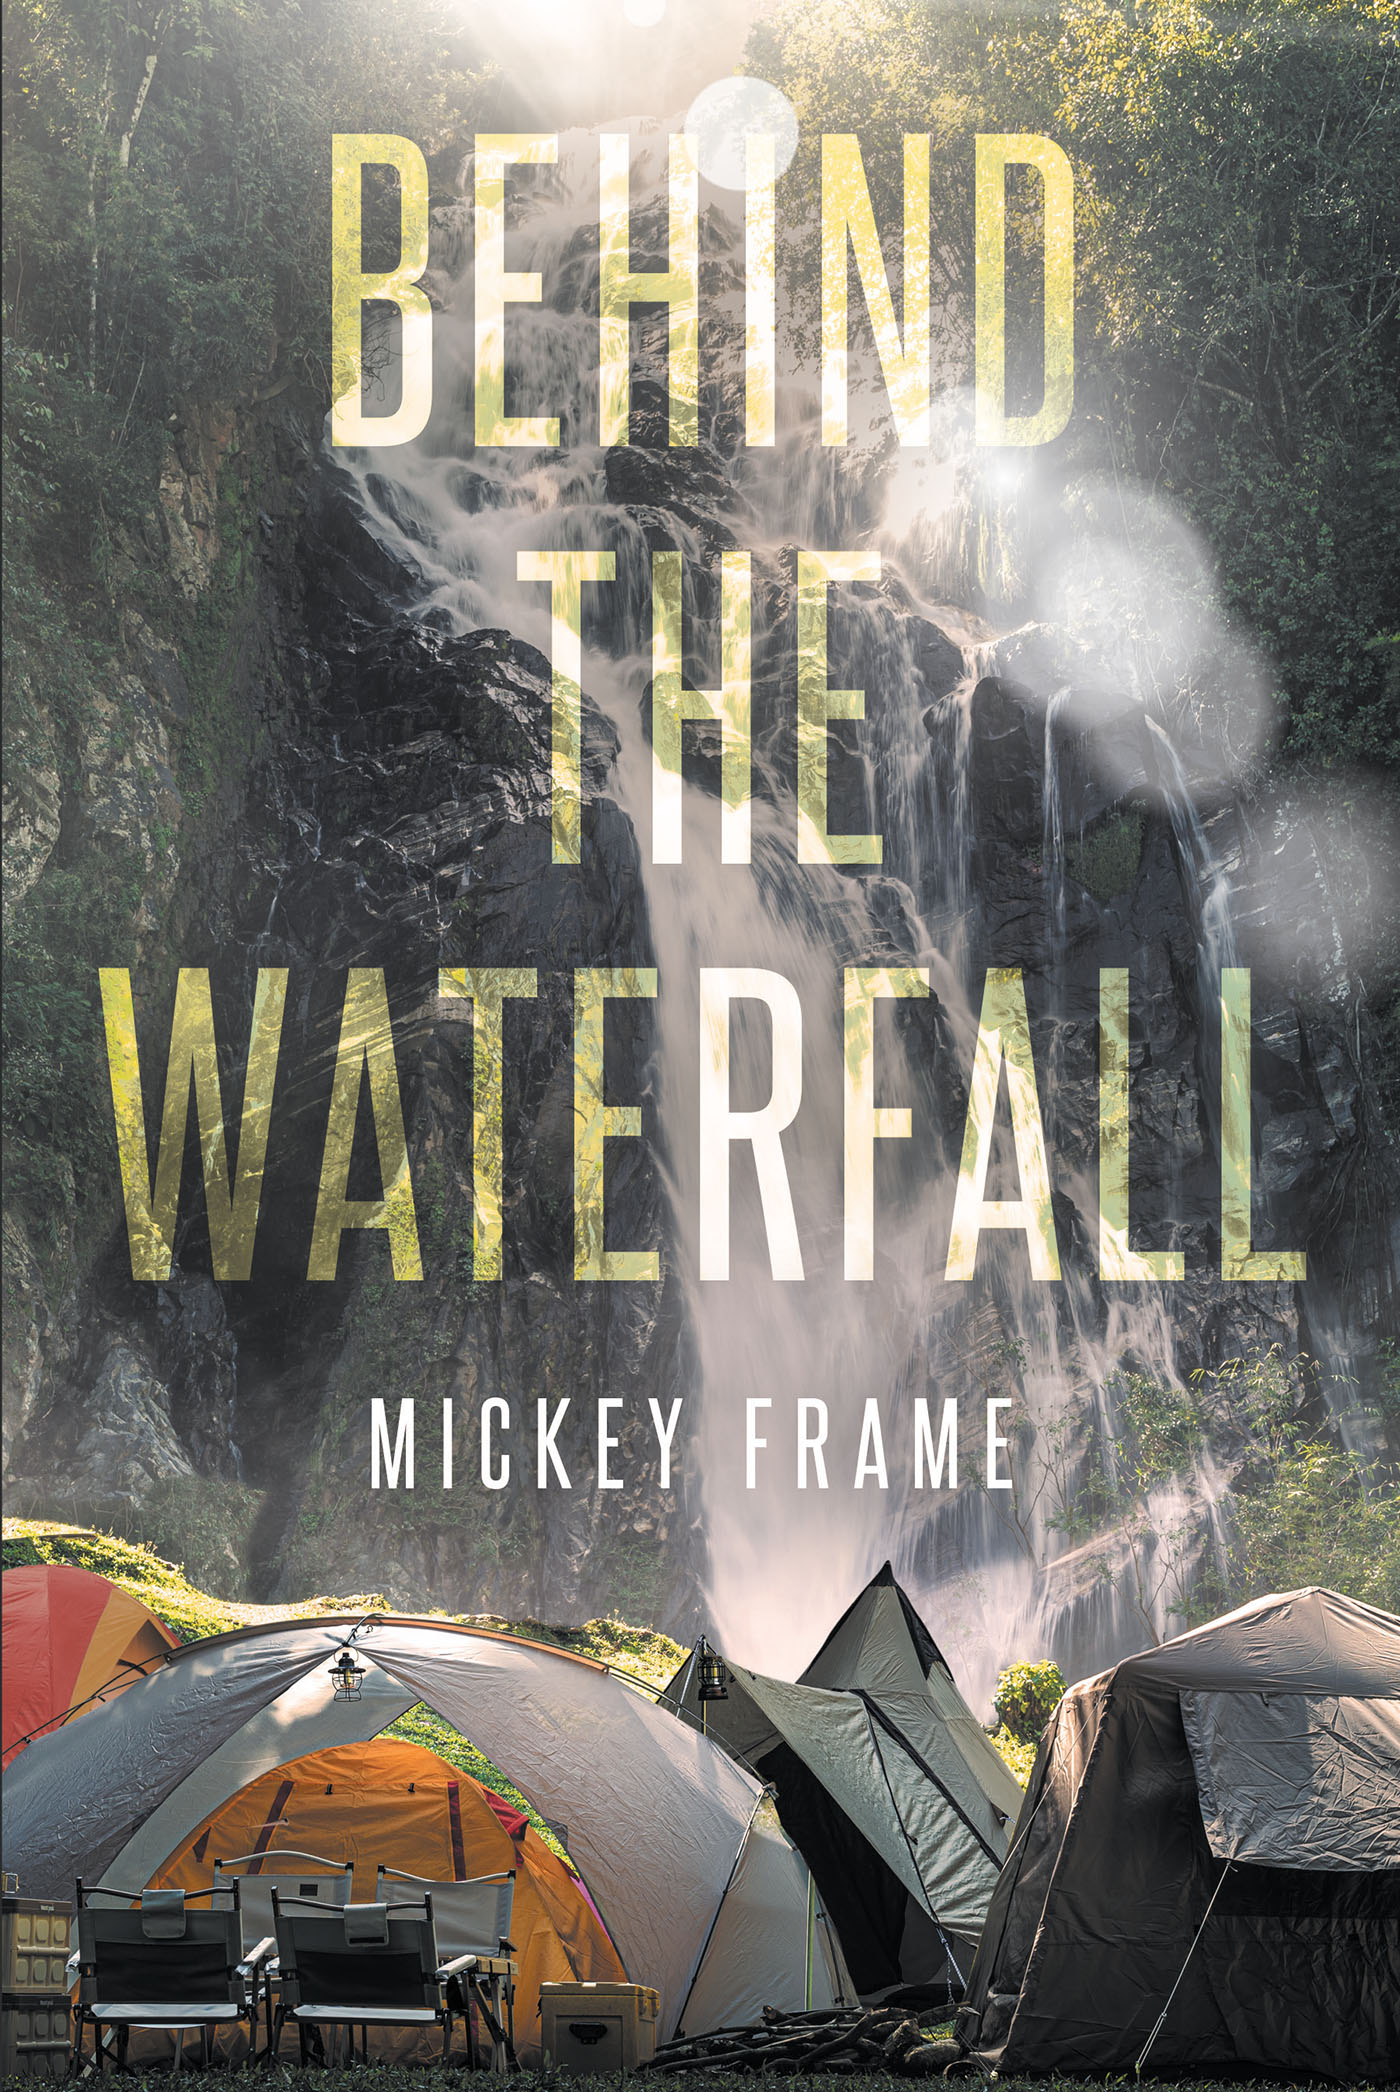 Author Mickey Frame’s New Book, "Behind the Waterfall," is an Exhilarating Tale Centered Around the Exploits of Sit George, a Knight Who Becomes Embroiled in the Crusades